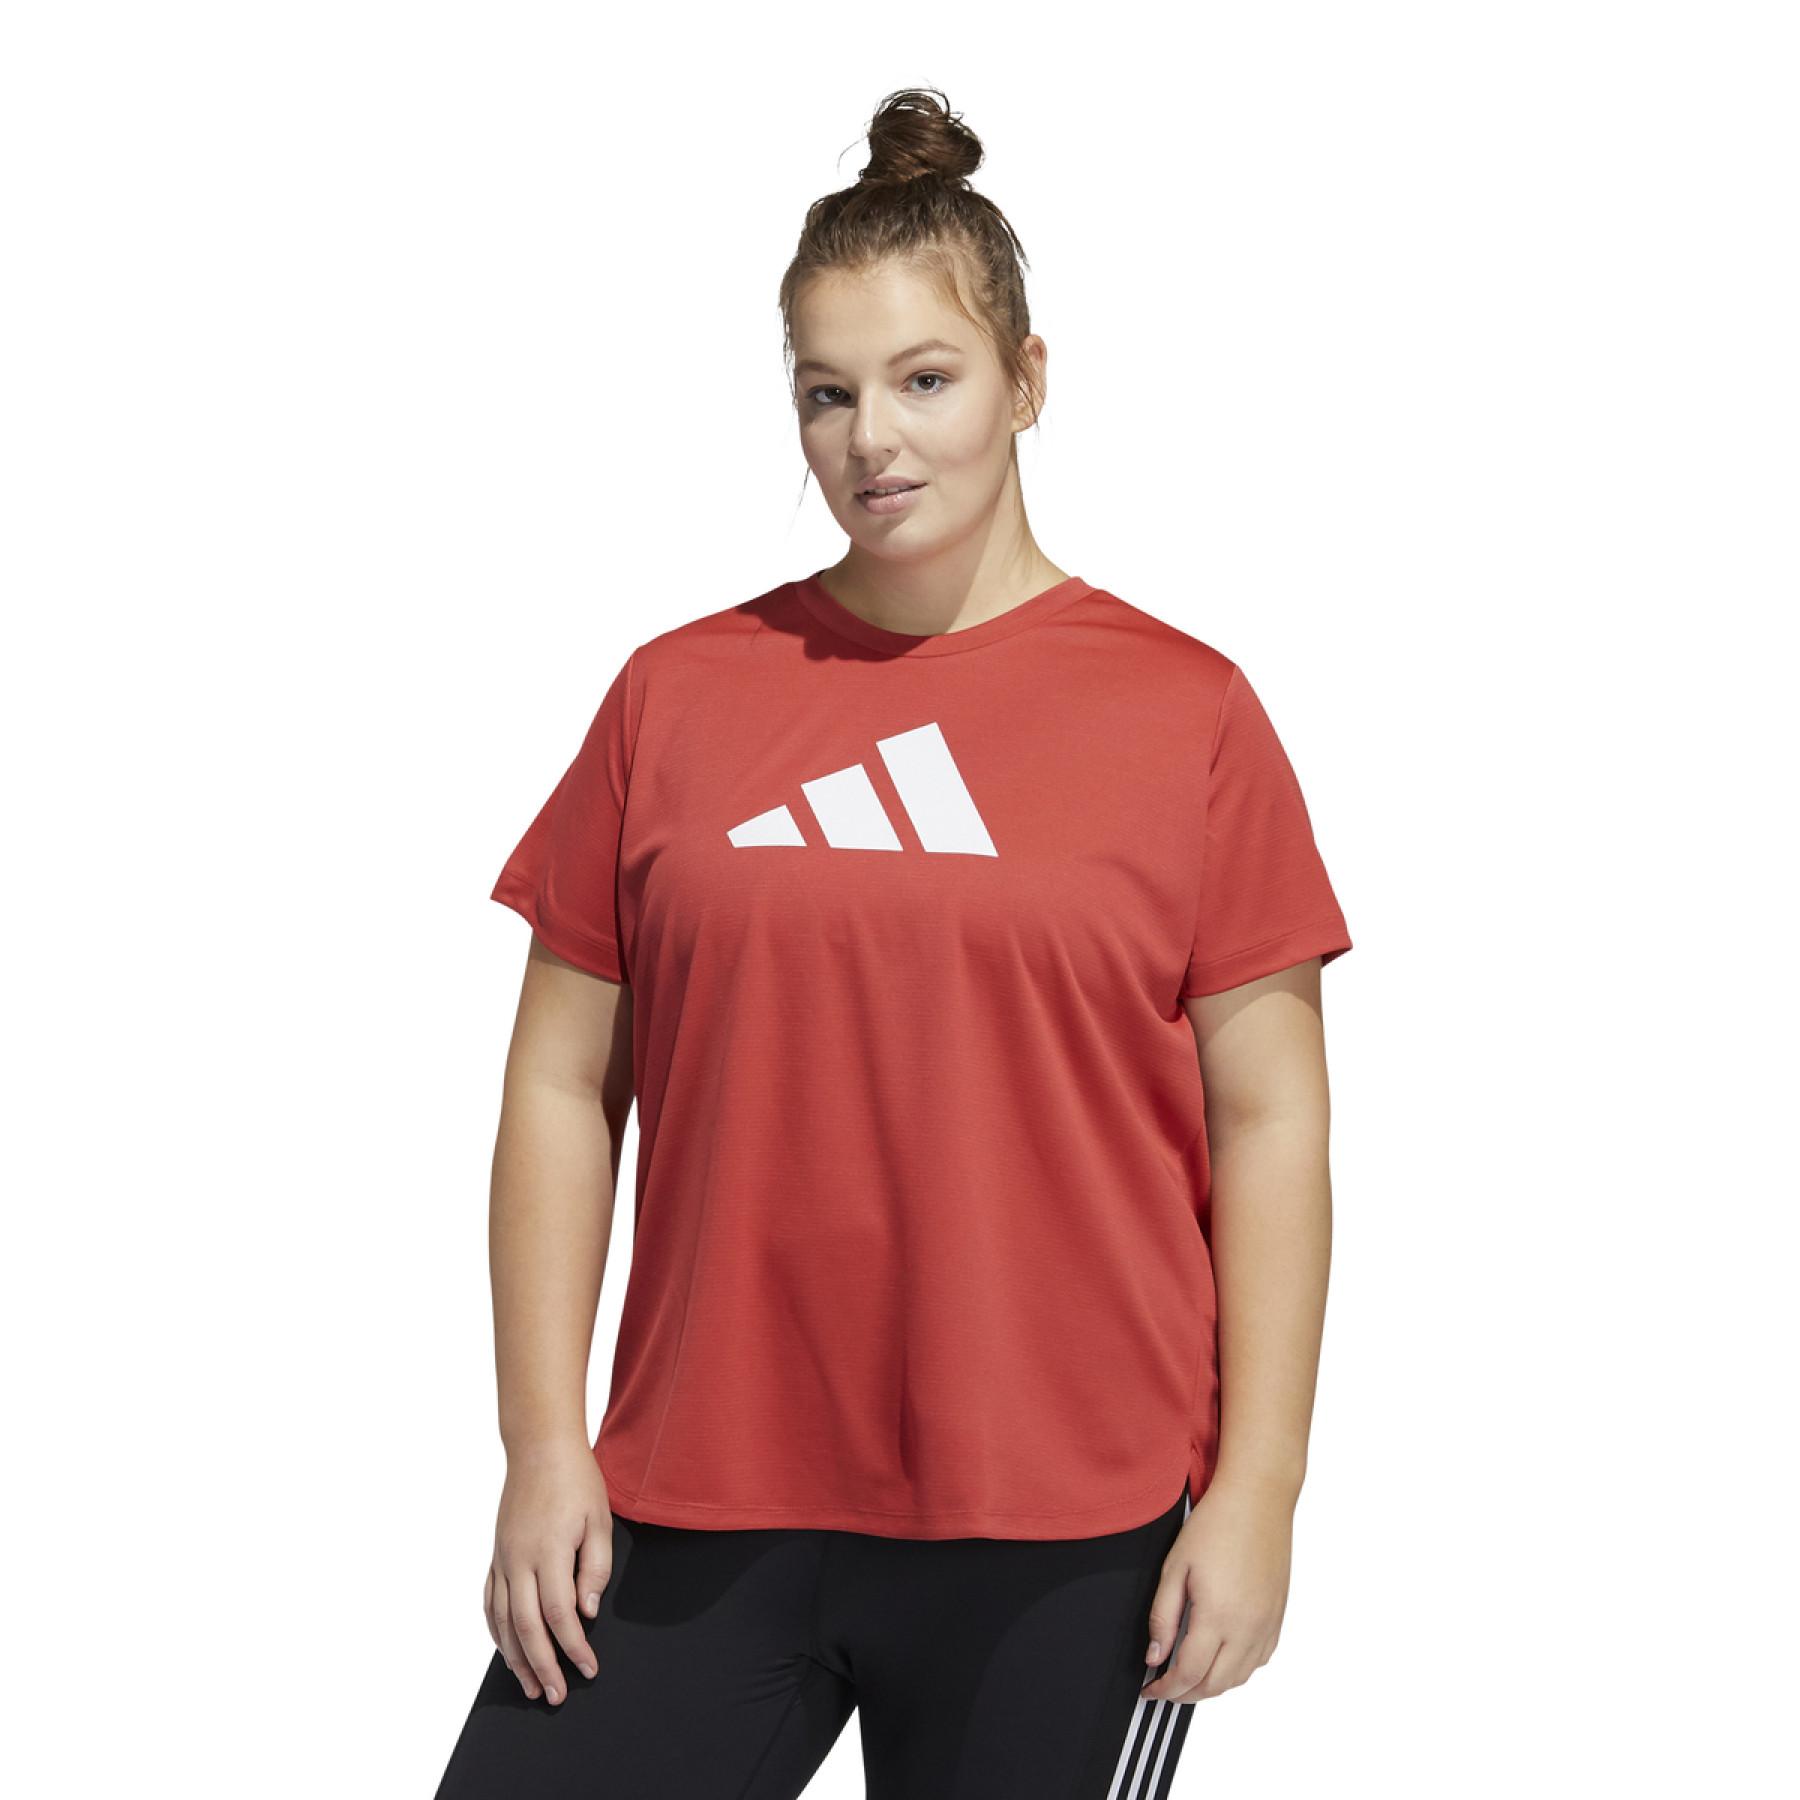 T-shirt femme adidas Badge of Sport Grande Taille